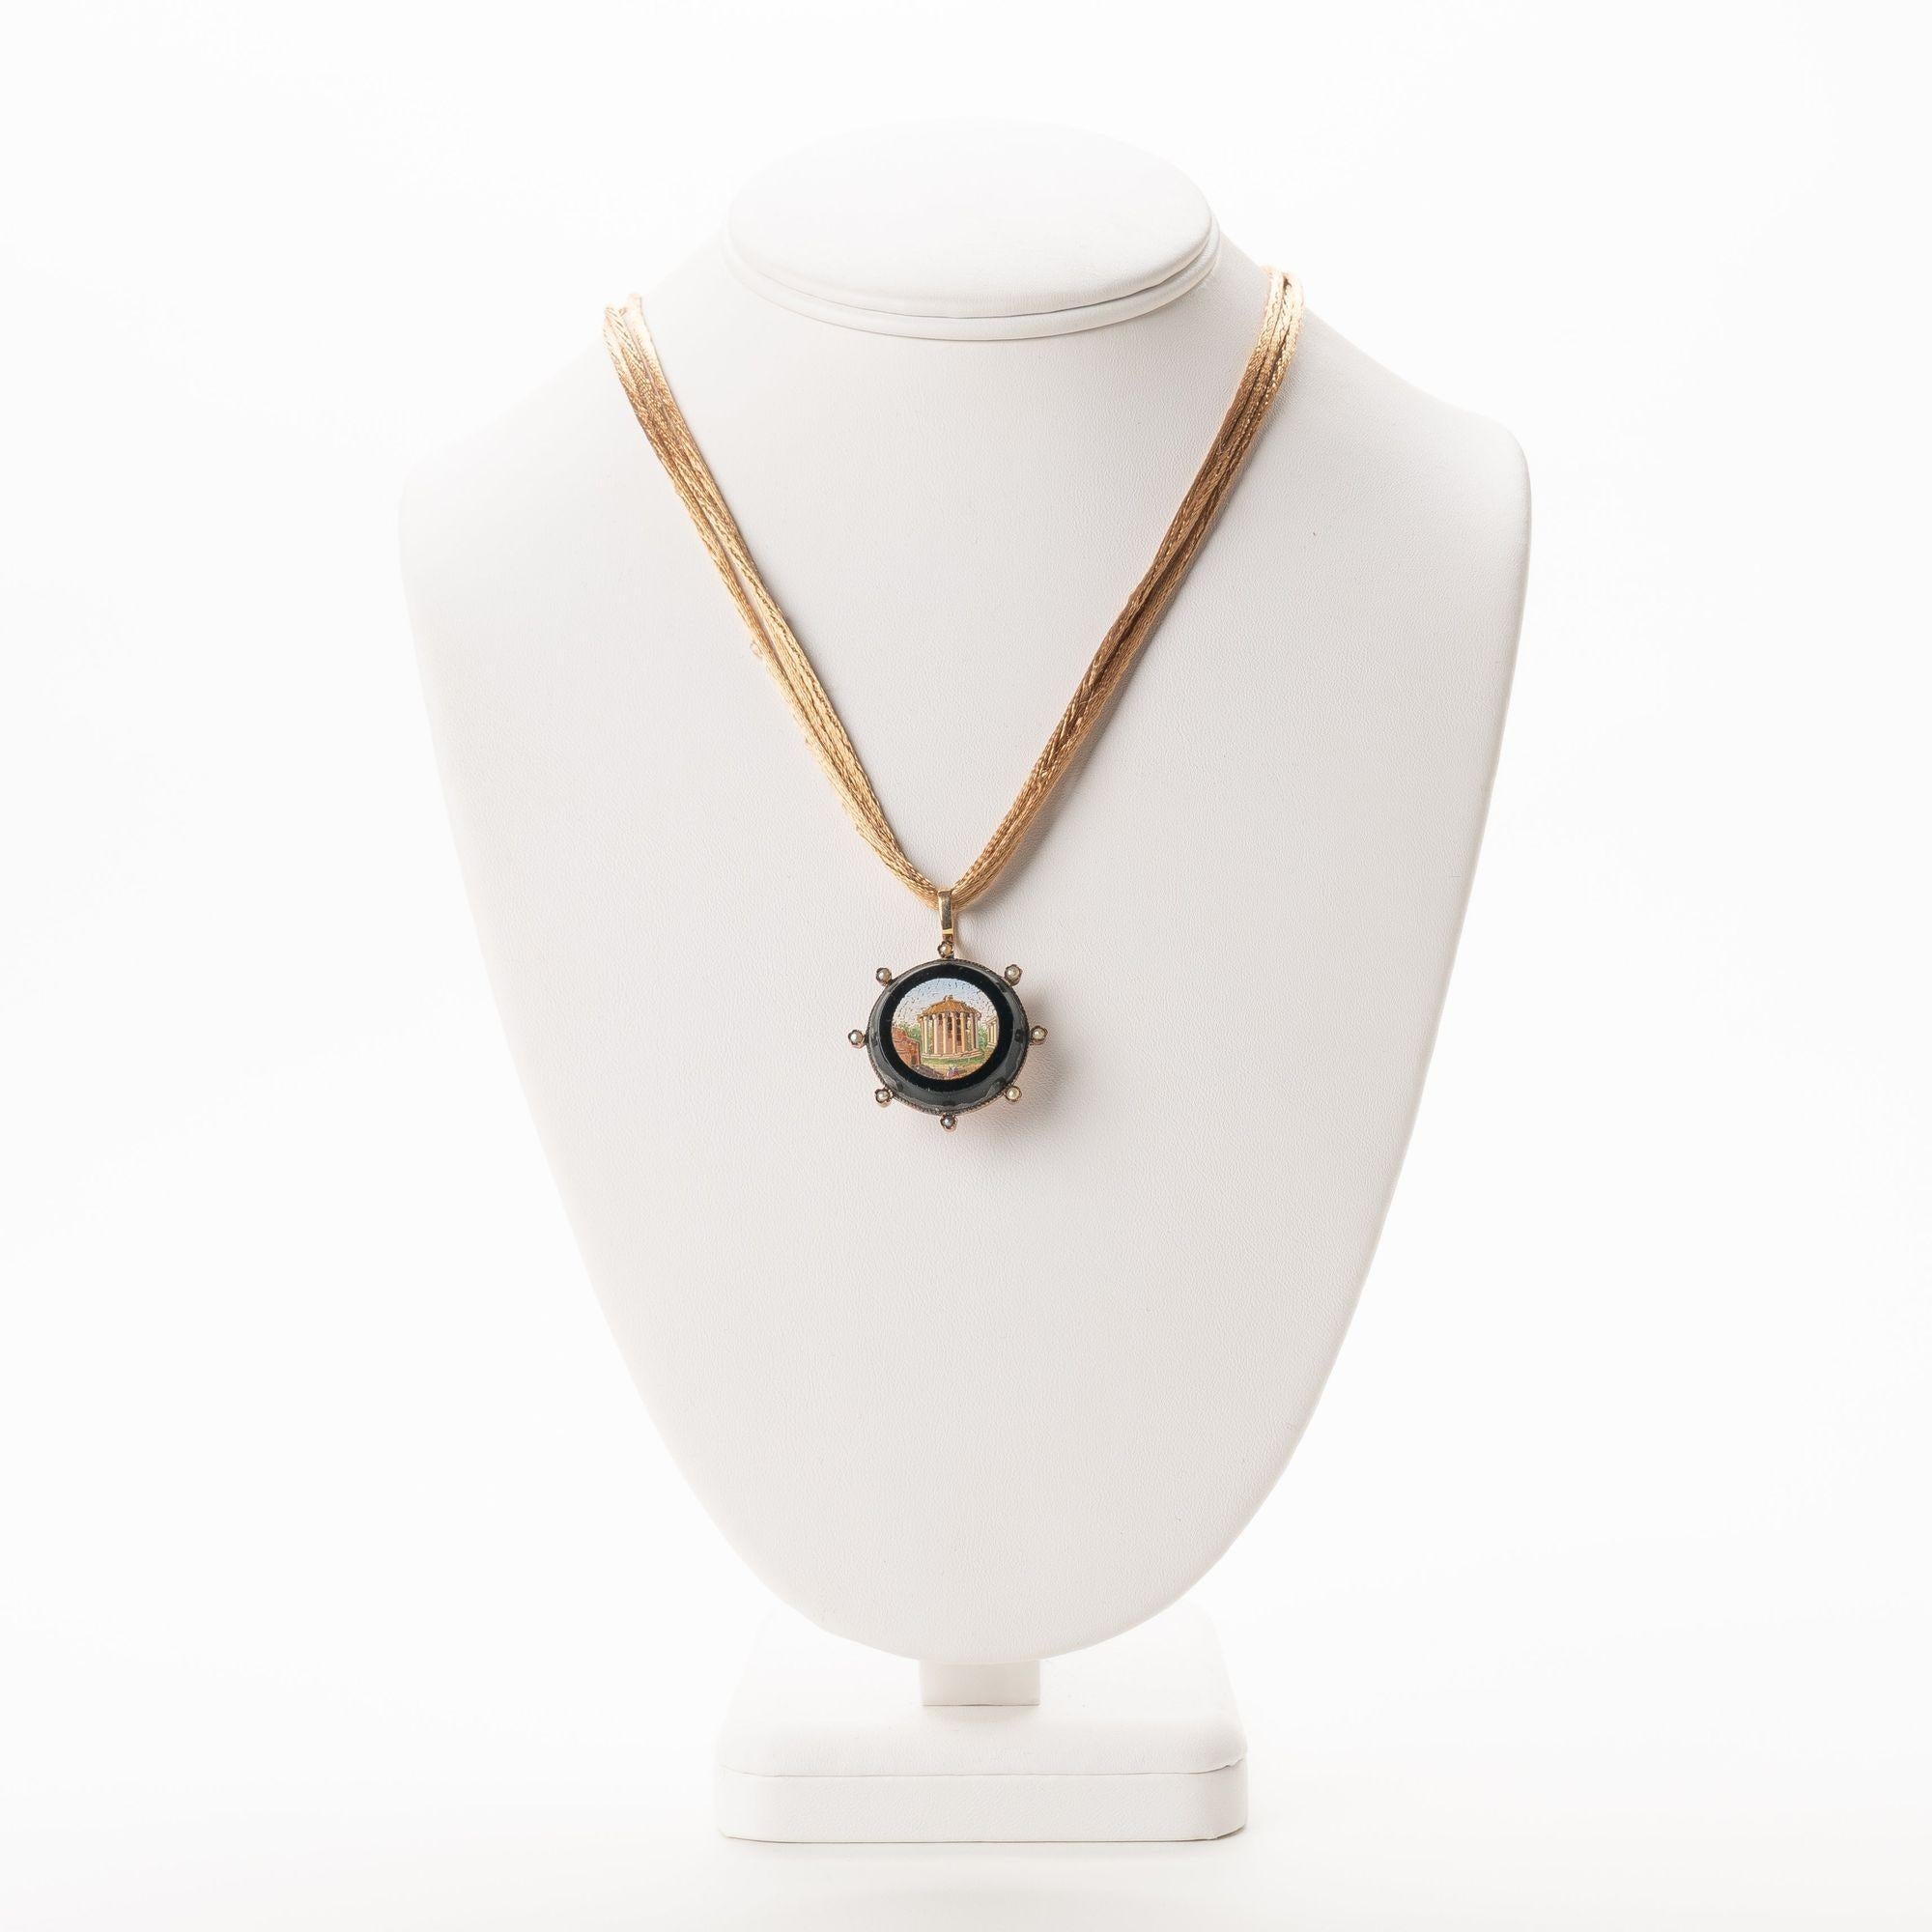 Circular micro mosaic pin pendant centers on the Temple of Vesta in the Roman forum. The micro mosaic pin is set in black glass, mounted in a gold bezel with eight radial mounted pearls, and fitted for use as a necklace on silk cords with 14k gold